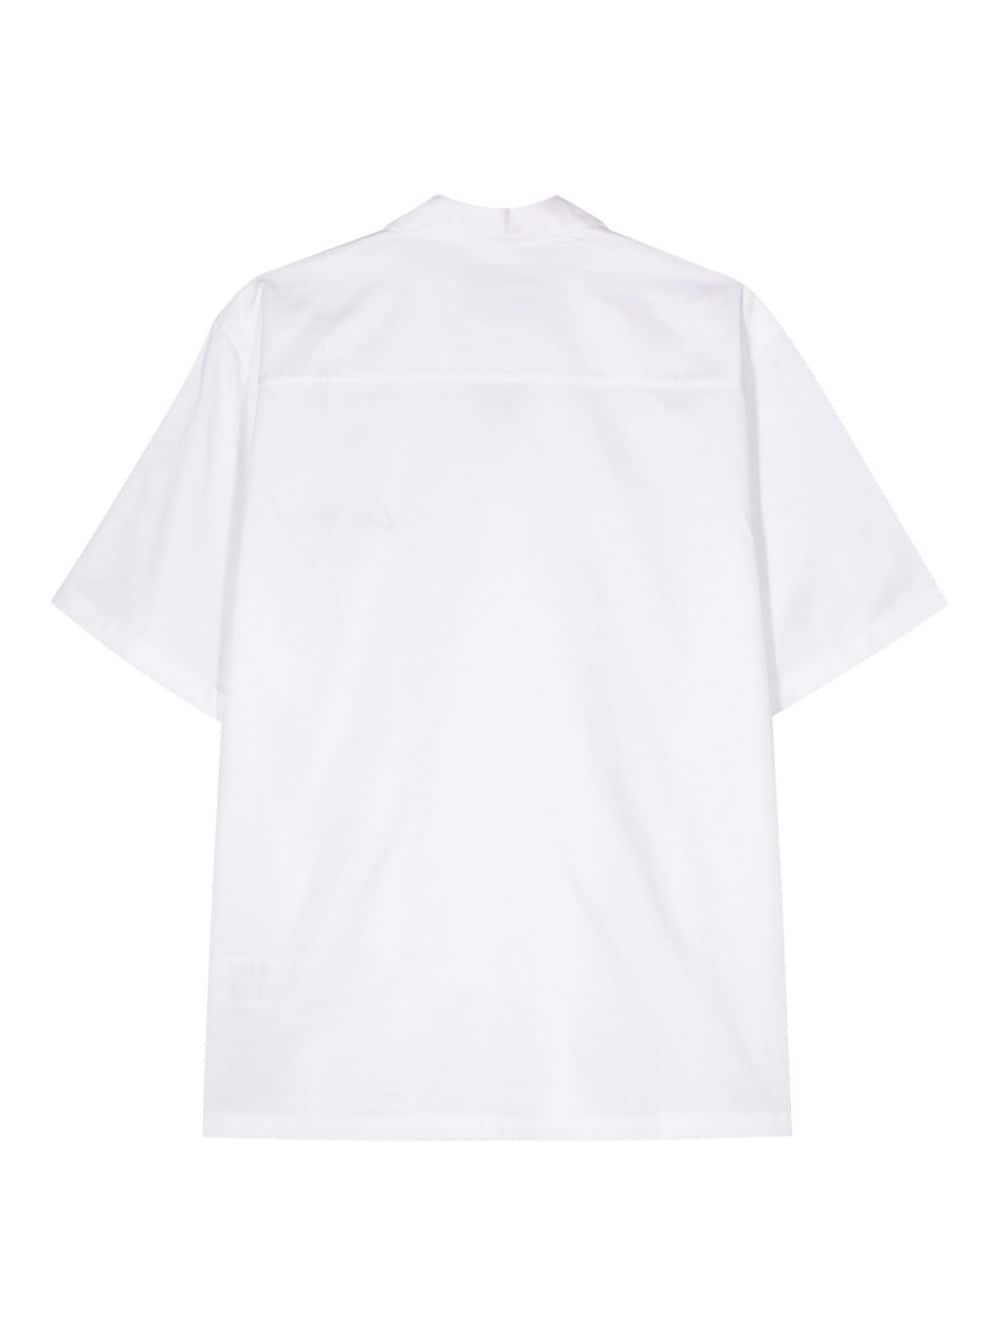 S/S Delray logo-embroidered shirt - 2